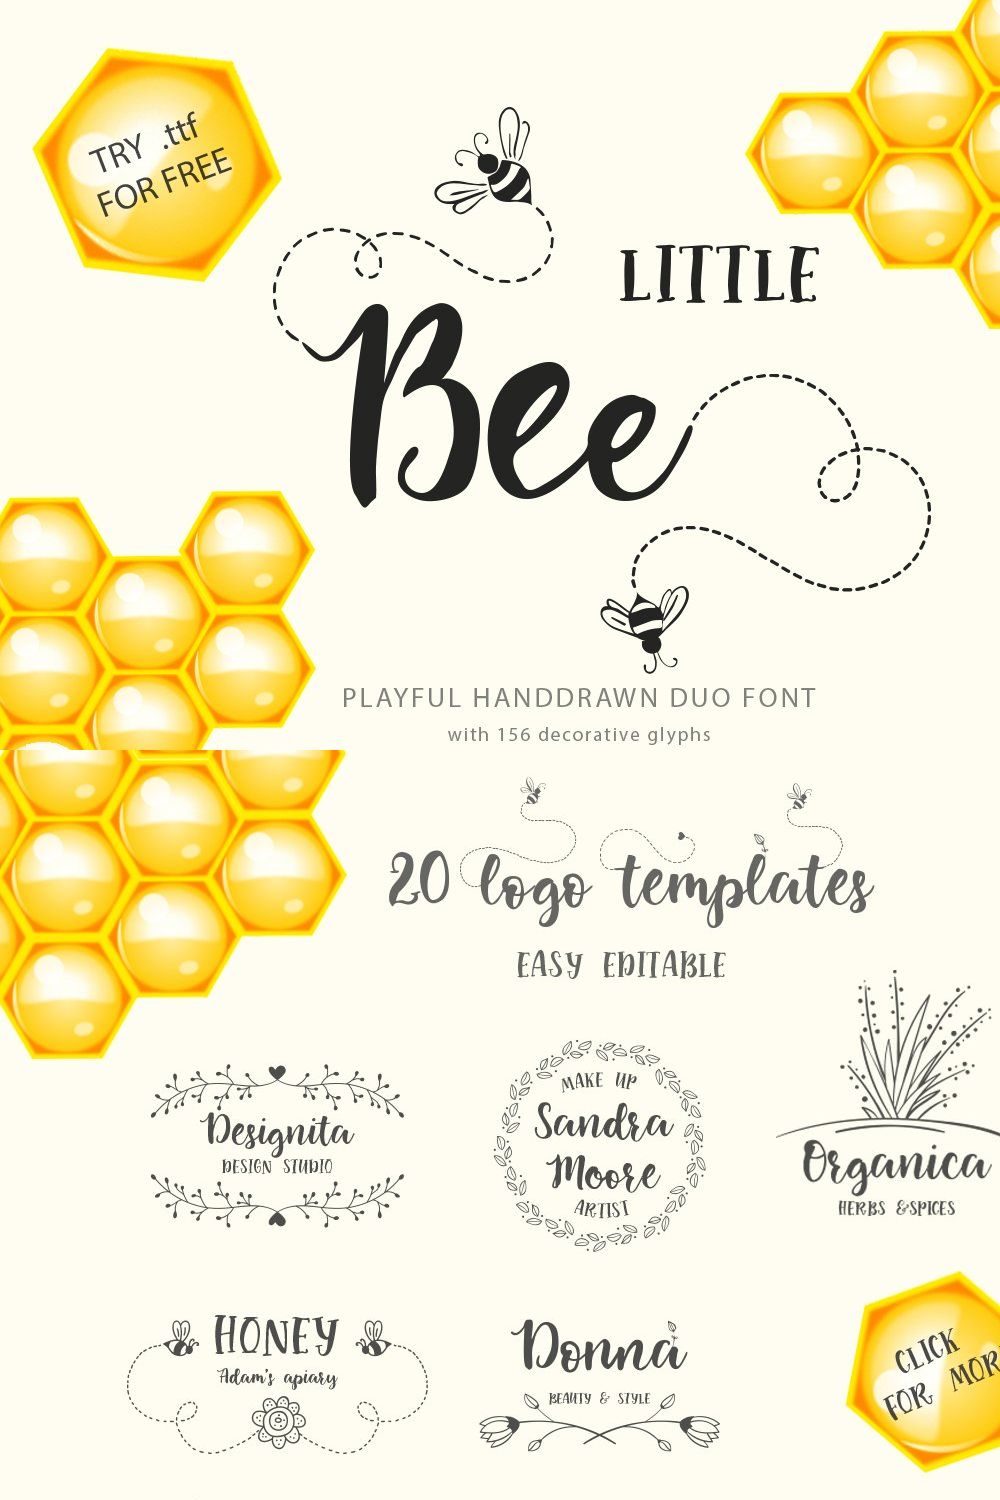 Little Bee. Duo font & logos. pinterest preview image.